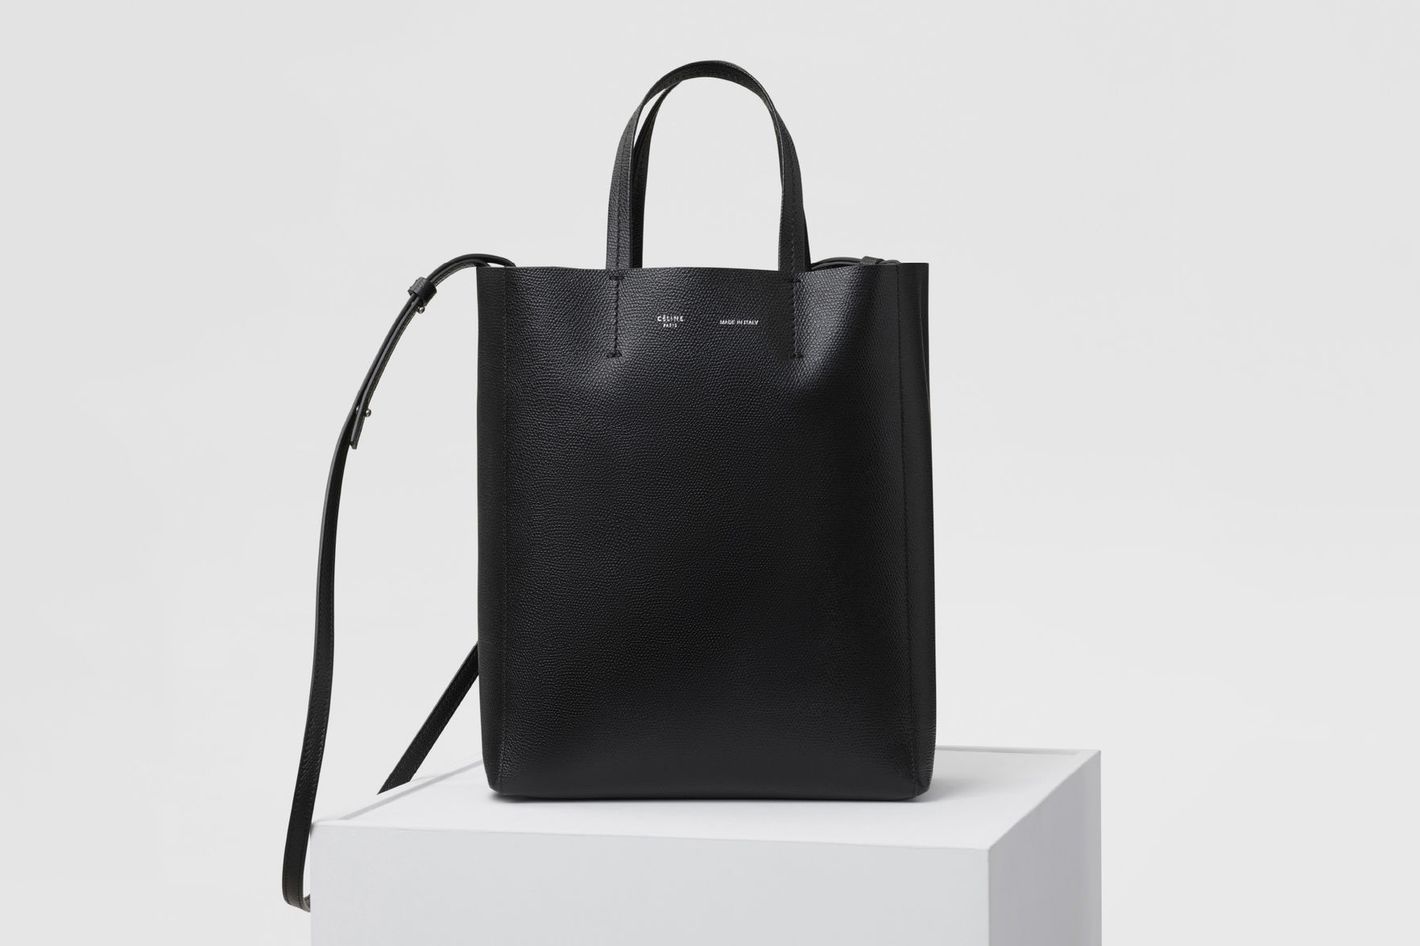 Best Women's Tote Bags For Workplace | Paul Smith